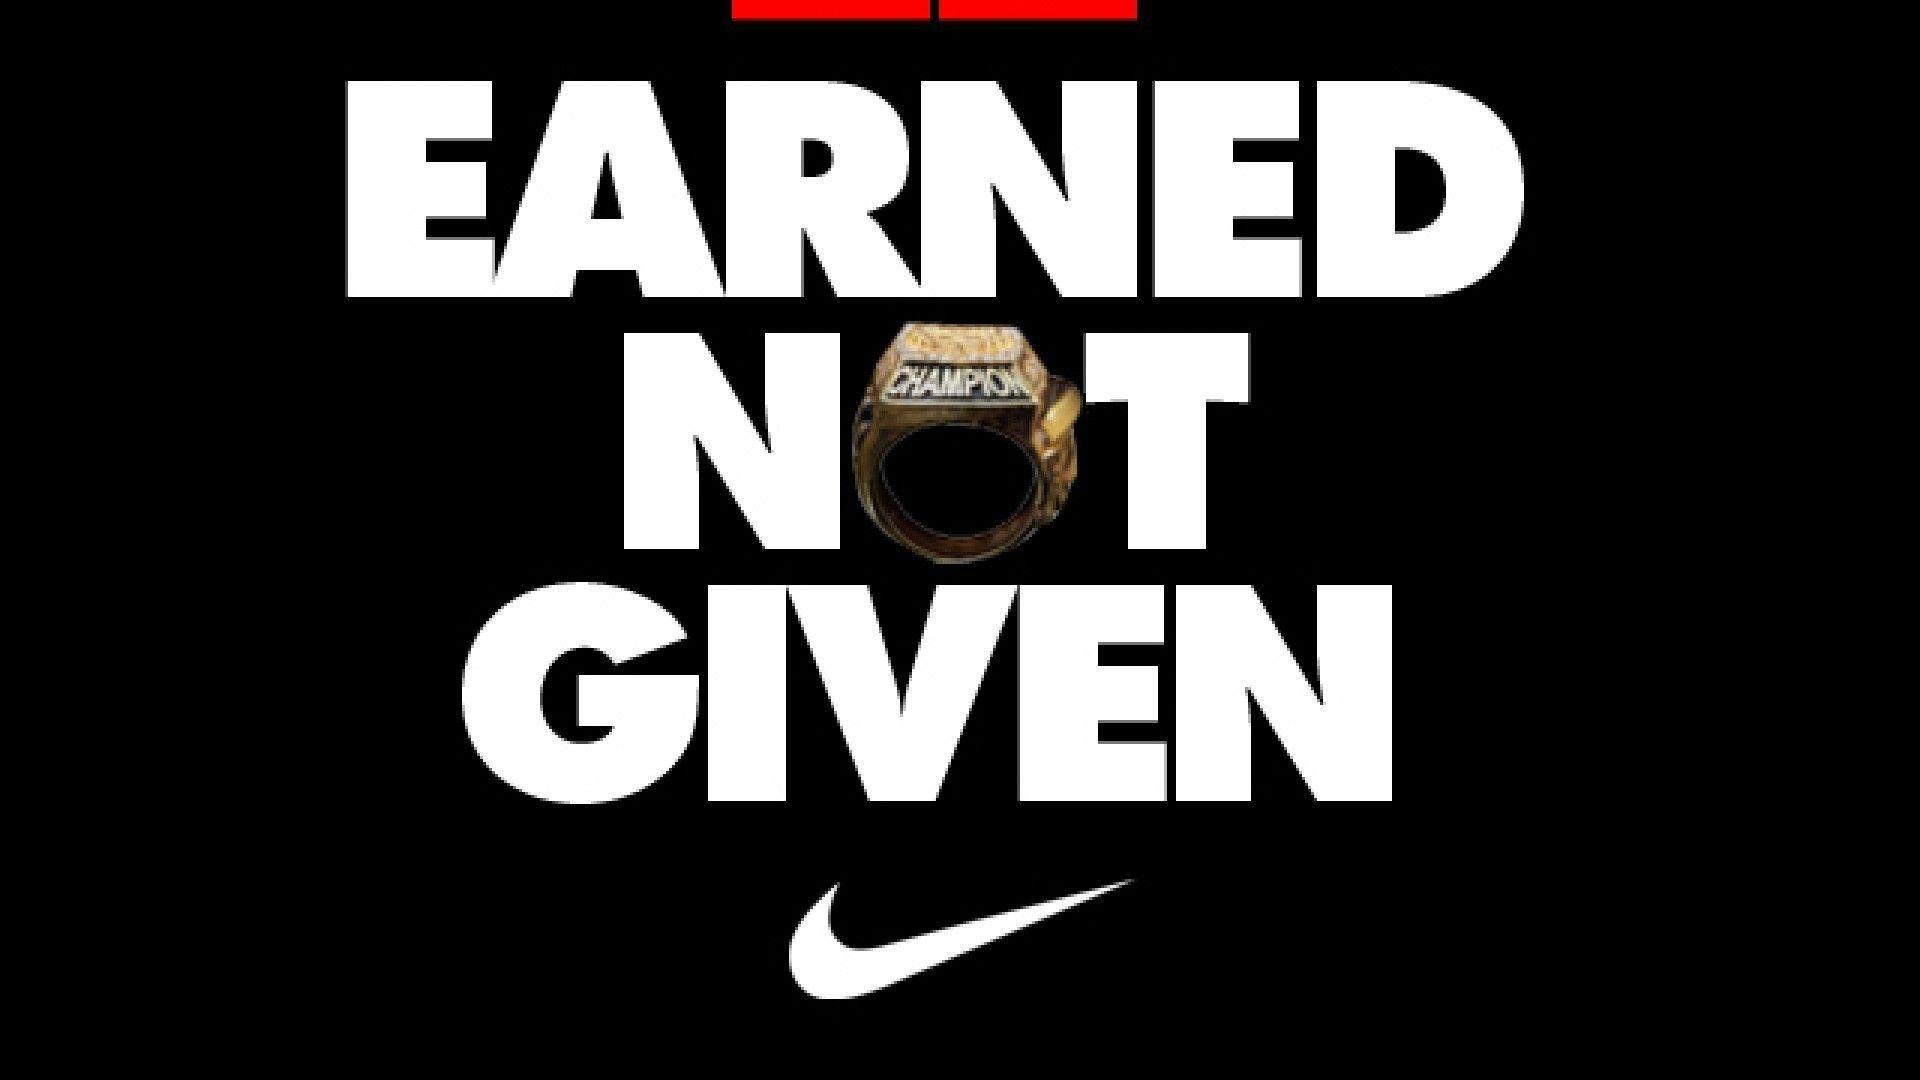 Nike Quotes Wallpapers Top Free Nike Quotes Backgrounds Wallpaperaccess A collection of the top 57 nike quotes wallpapers and backgrounds available for download for free. nike quotes wallpapers top free nike